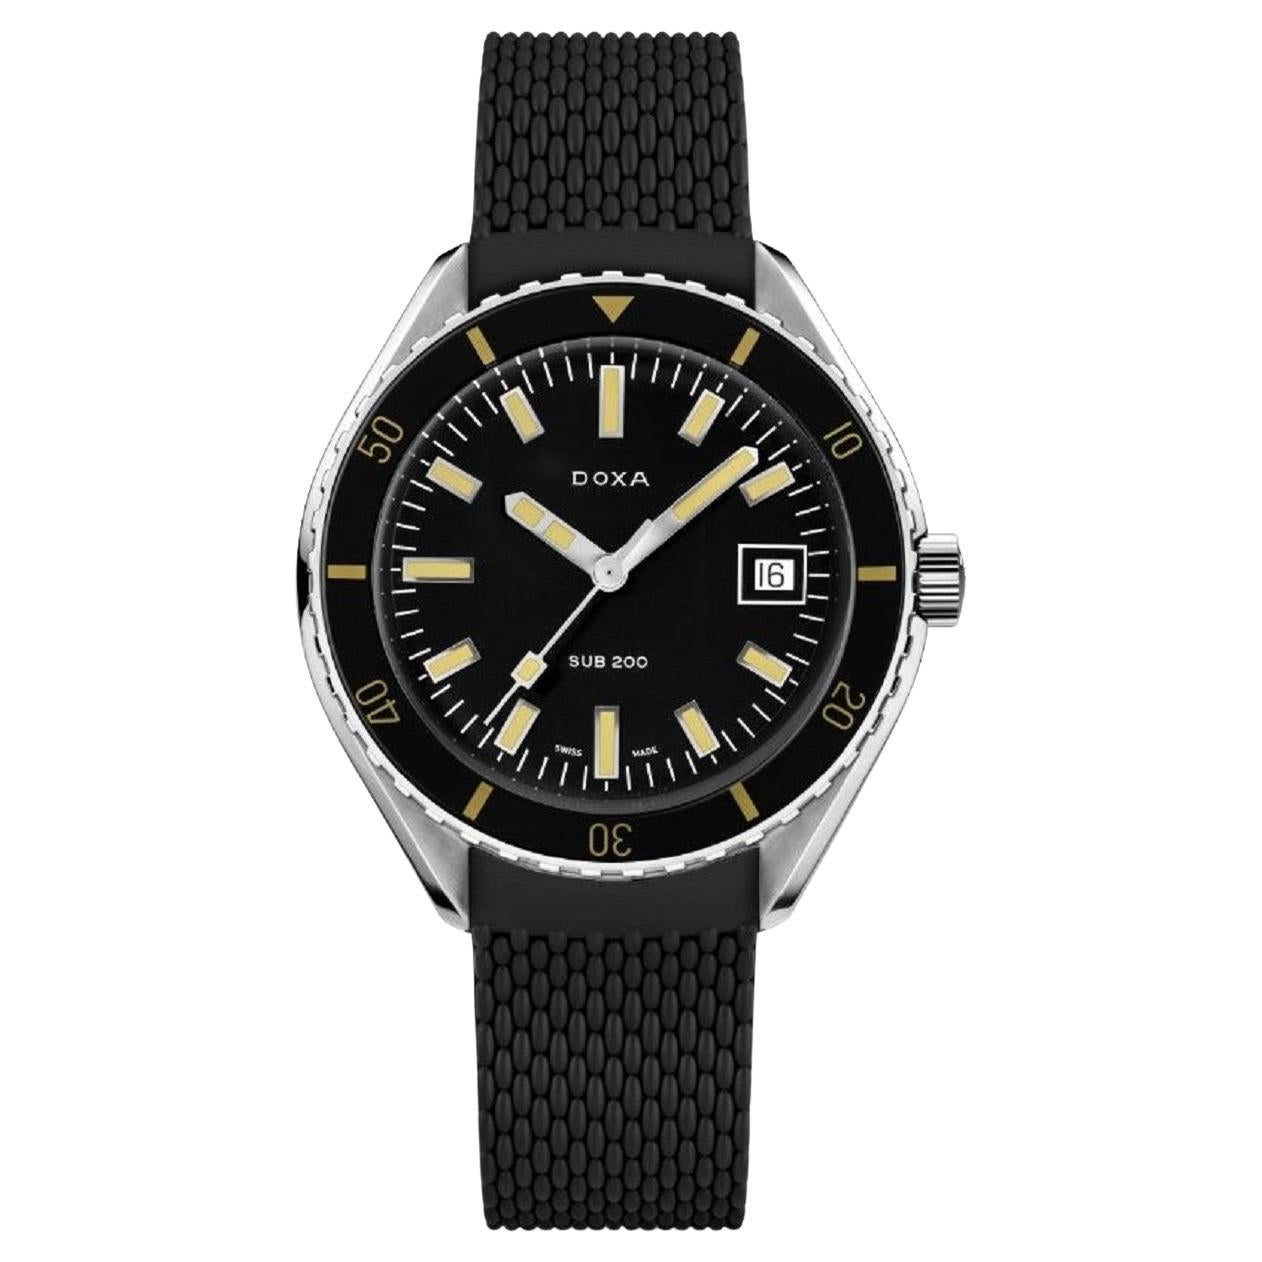 Doxa Sub 200 Sharkhunter Automatic Black Dial Men's Watch 799.10.101.20 For Sale